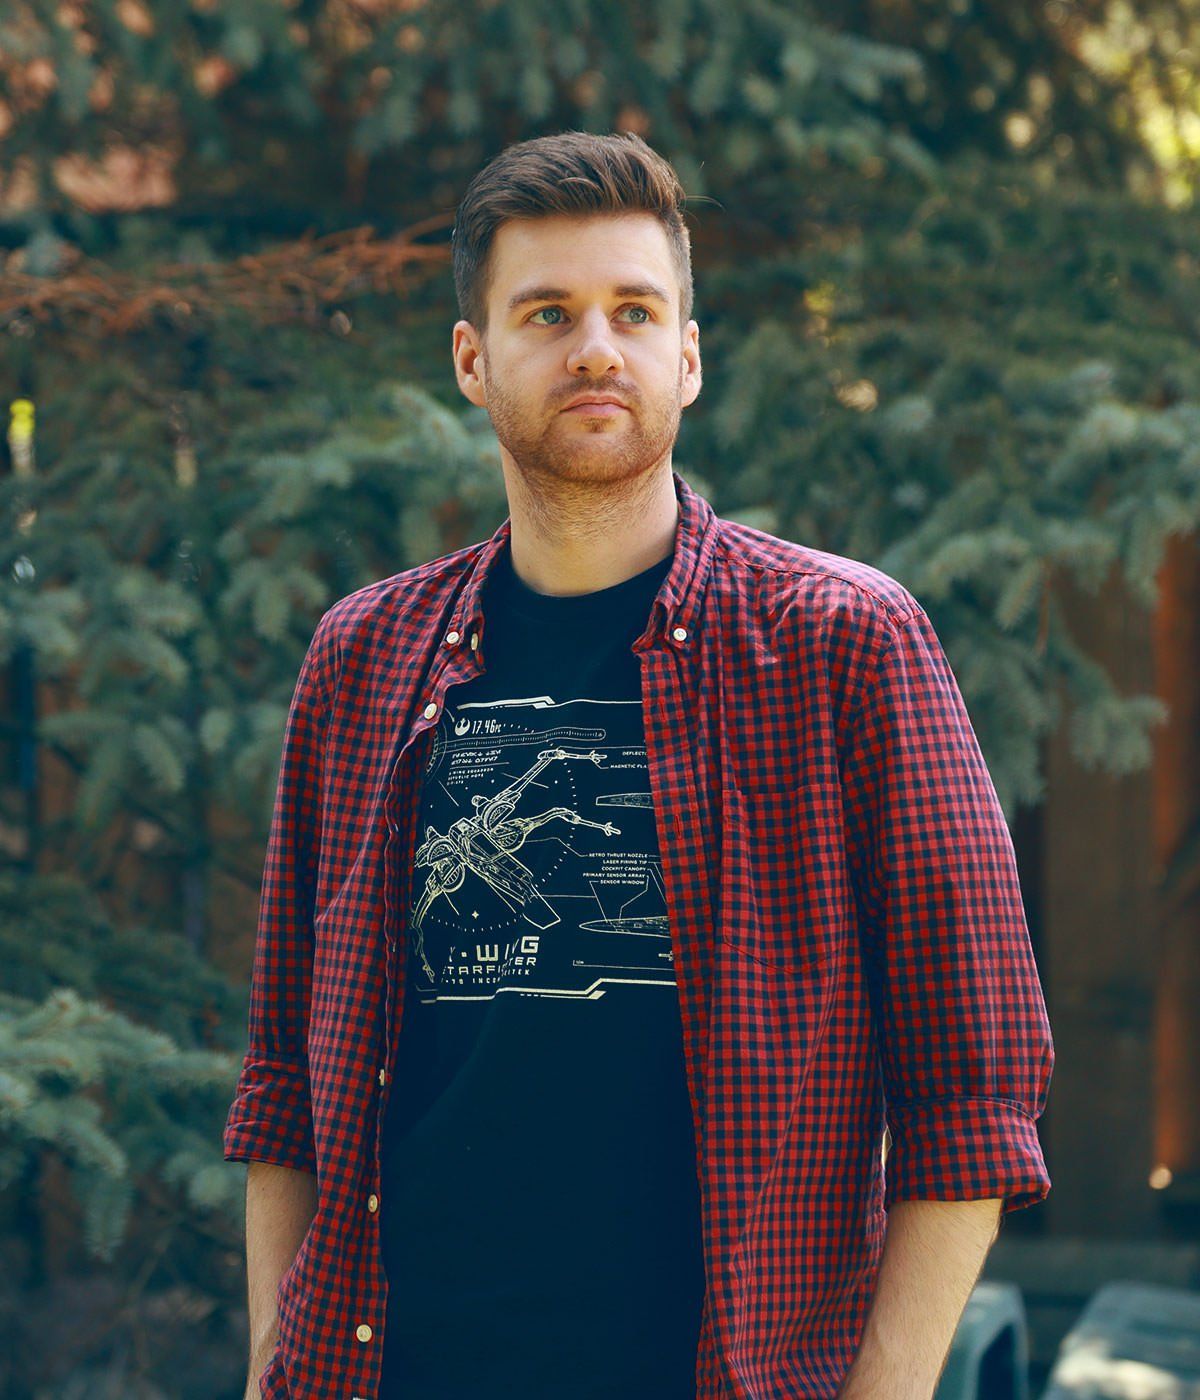 a man wearing a plaid shirt and a black t-shirt is standing in front of trees .